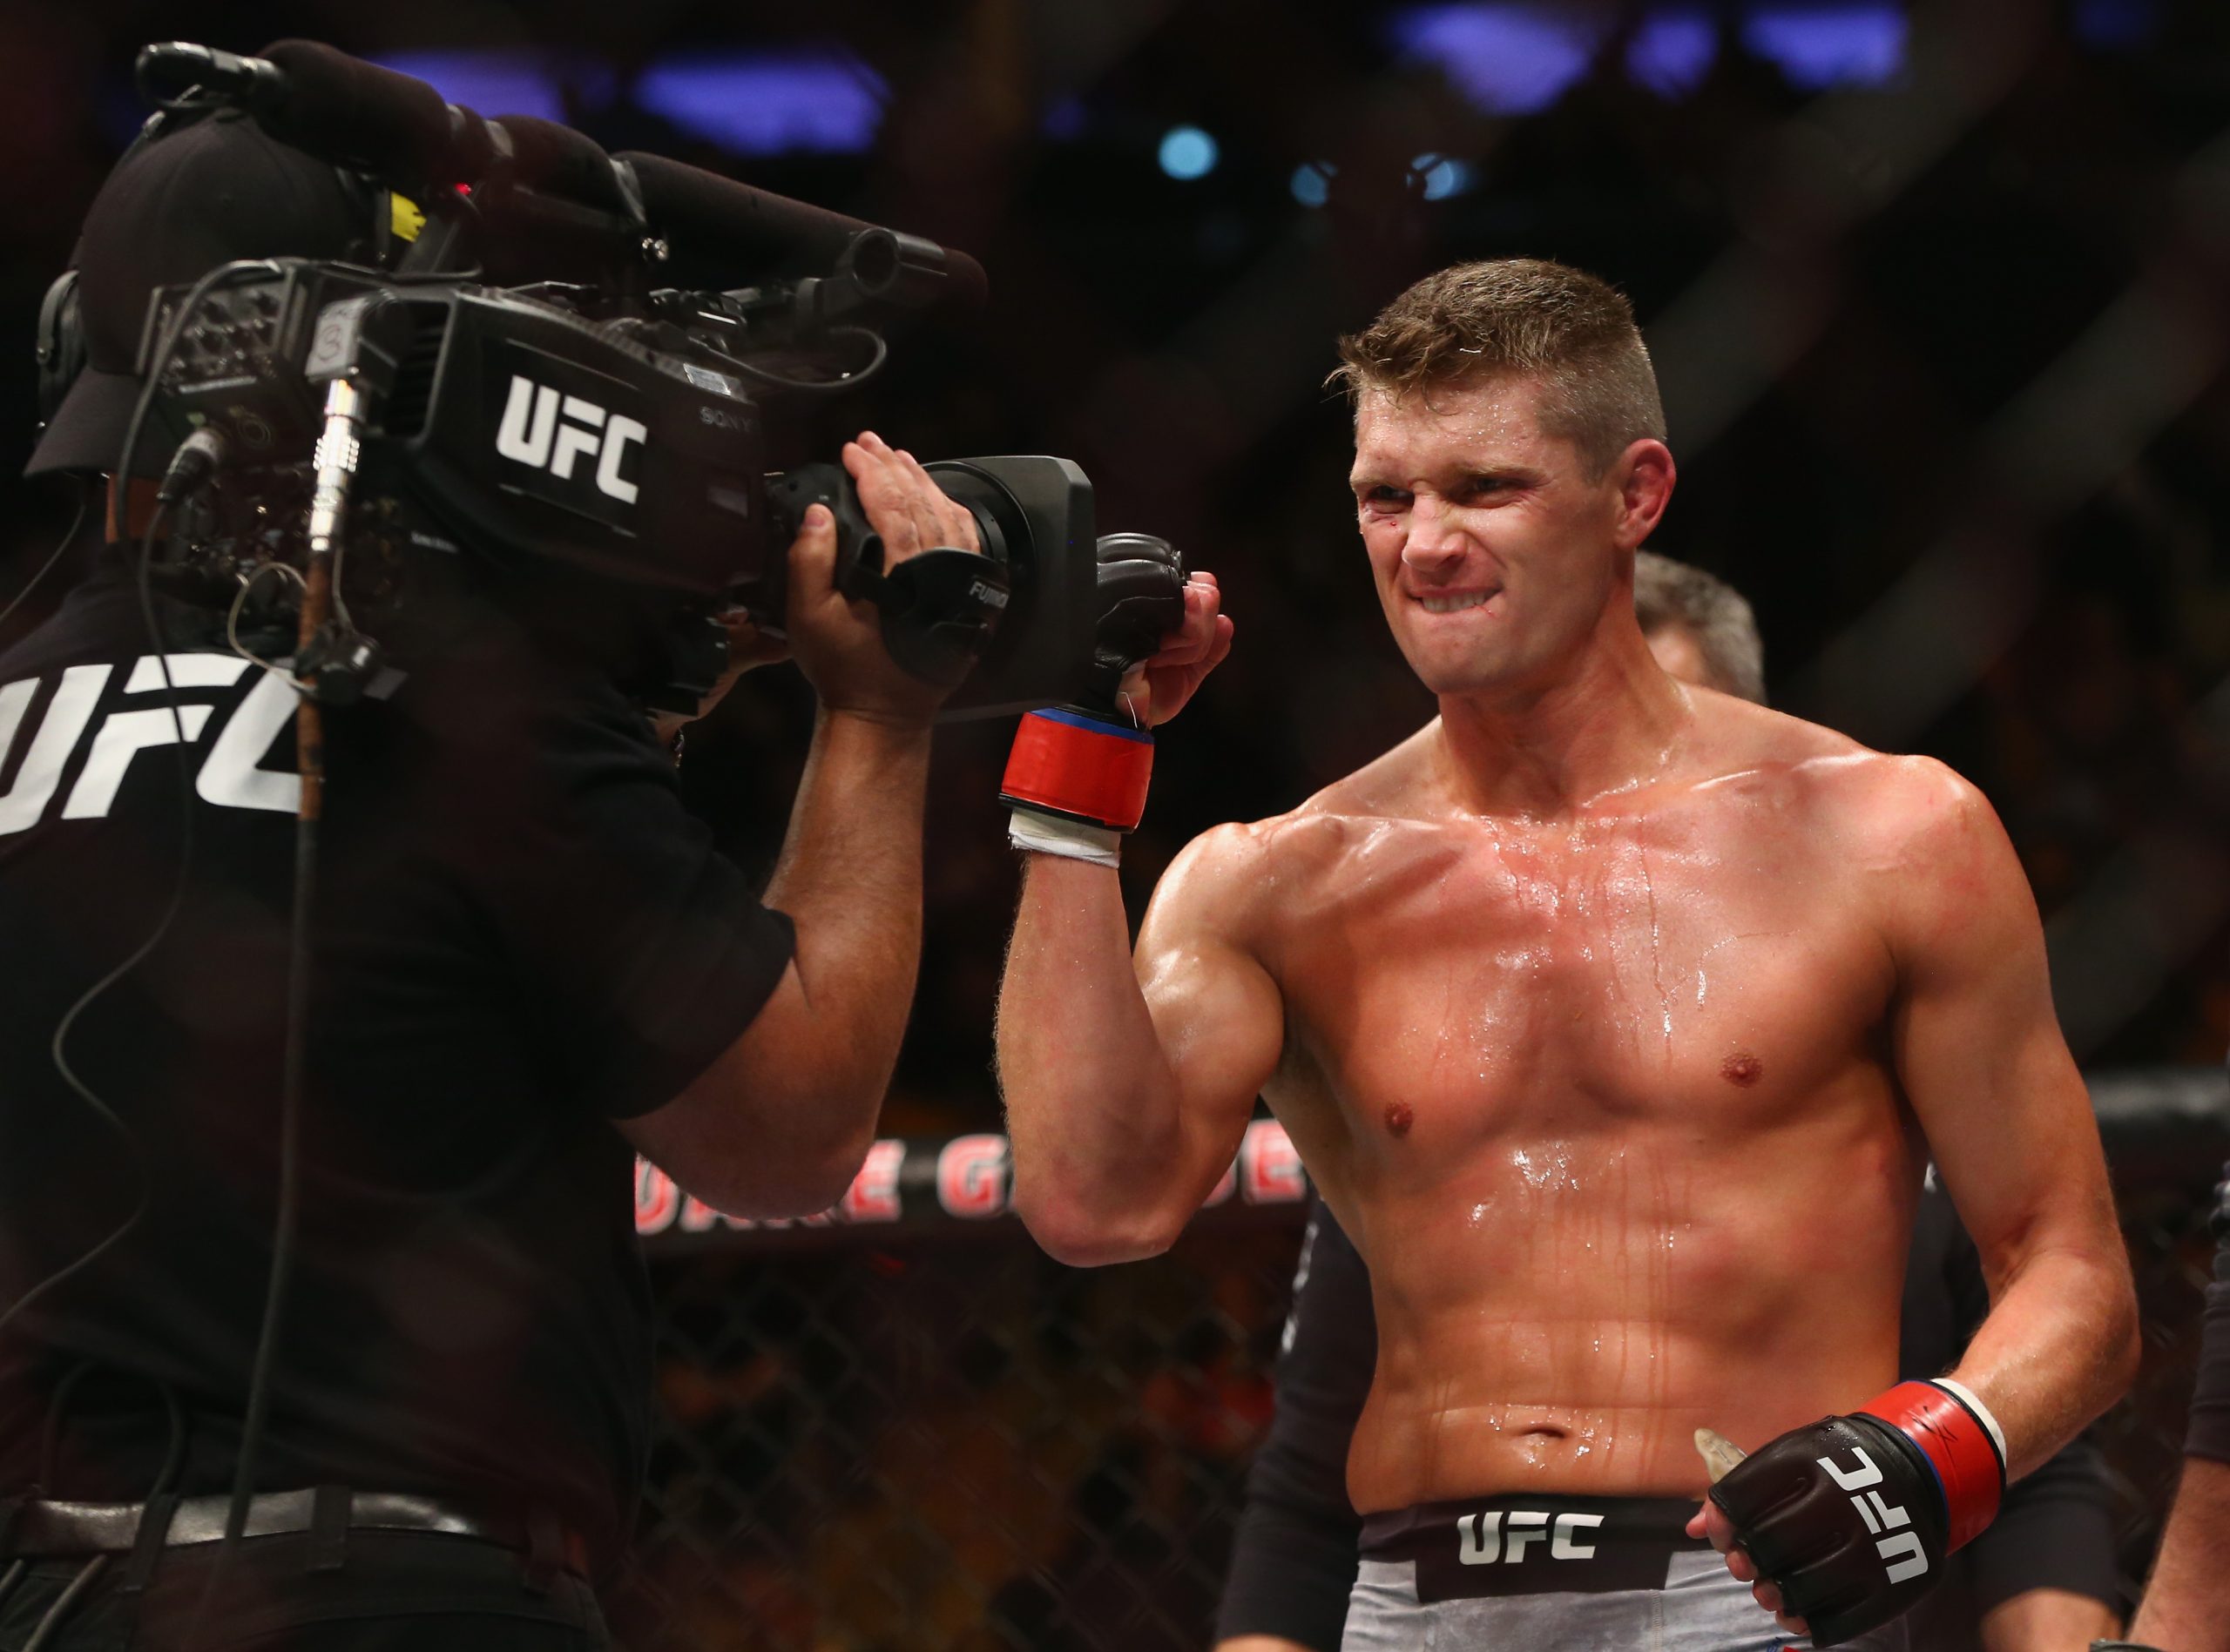 Stephen Thompson 2021 - Net Worth, Salary, Records, and Endorsements